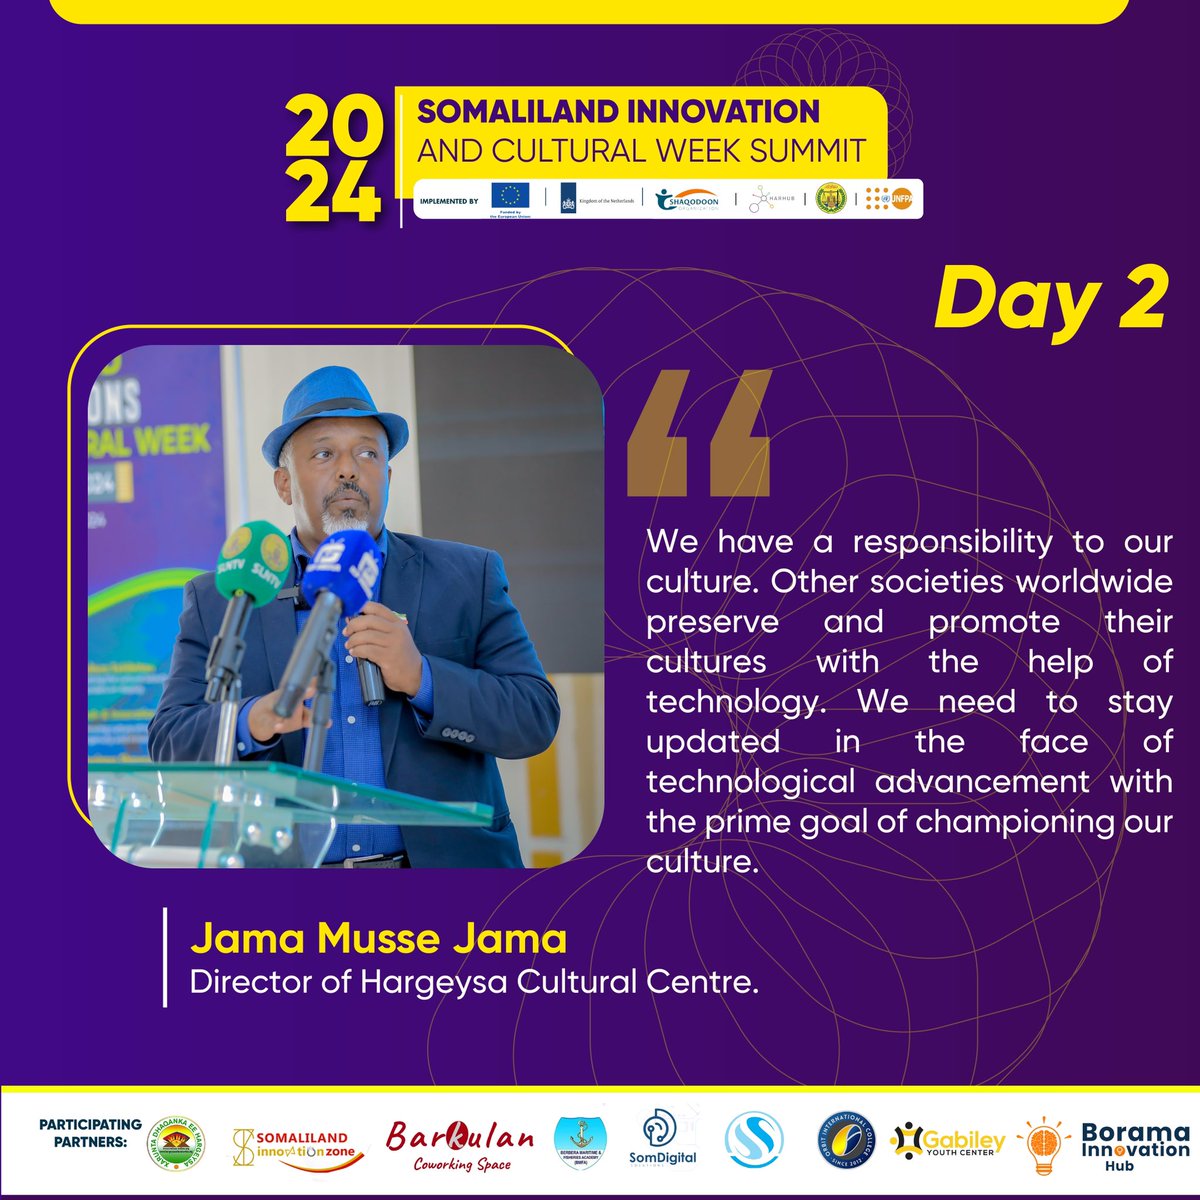 On #Day2 of the Hargeisa leg of the #SomalilandInnovationAndCultureWeek2024 @JamaMusse presents an insightful approach on the importance of conservation of Somali culture and language. @HarHub @EU_in_Somalia @NLinSomalia @UNFPA_SOMALIA @HargeysaCC For more info on the…